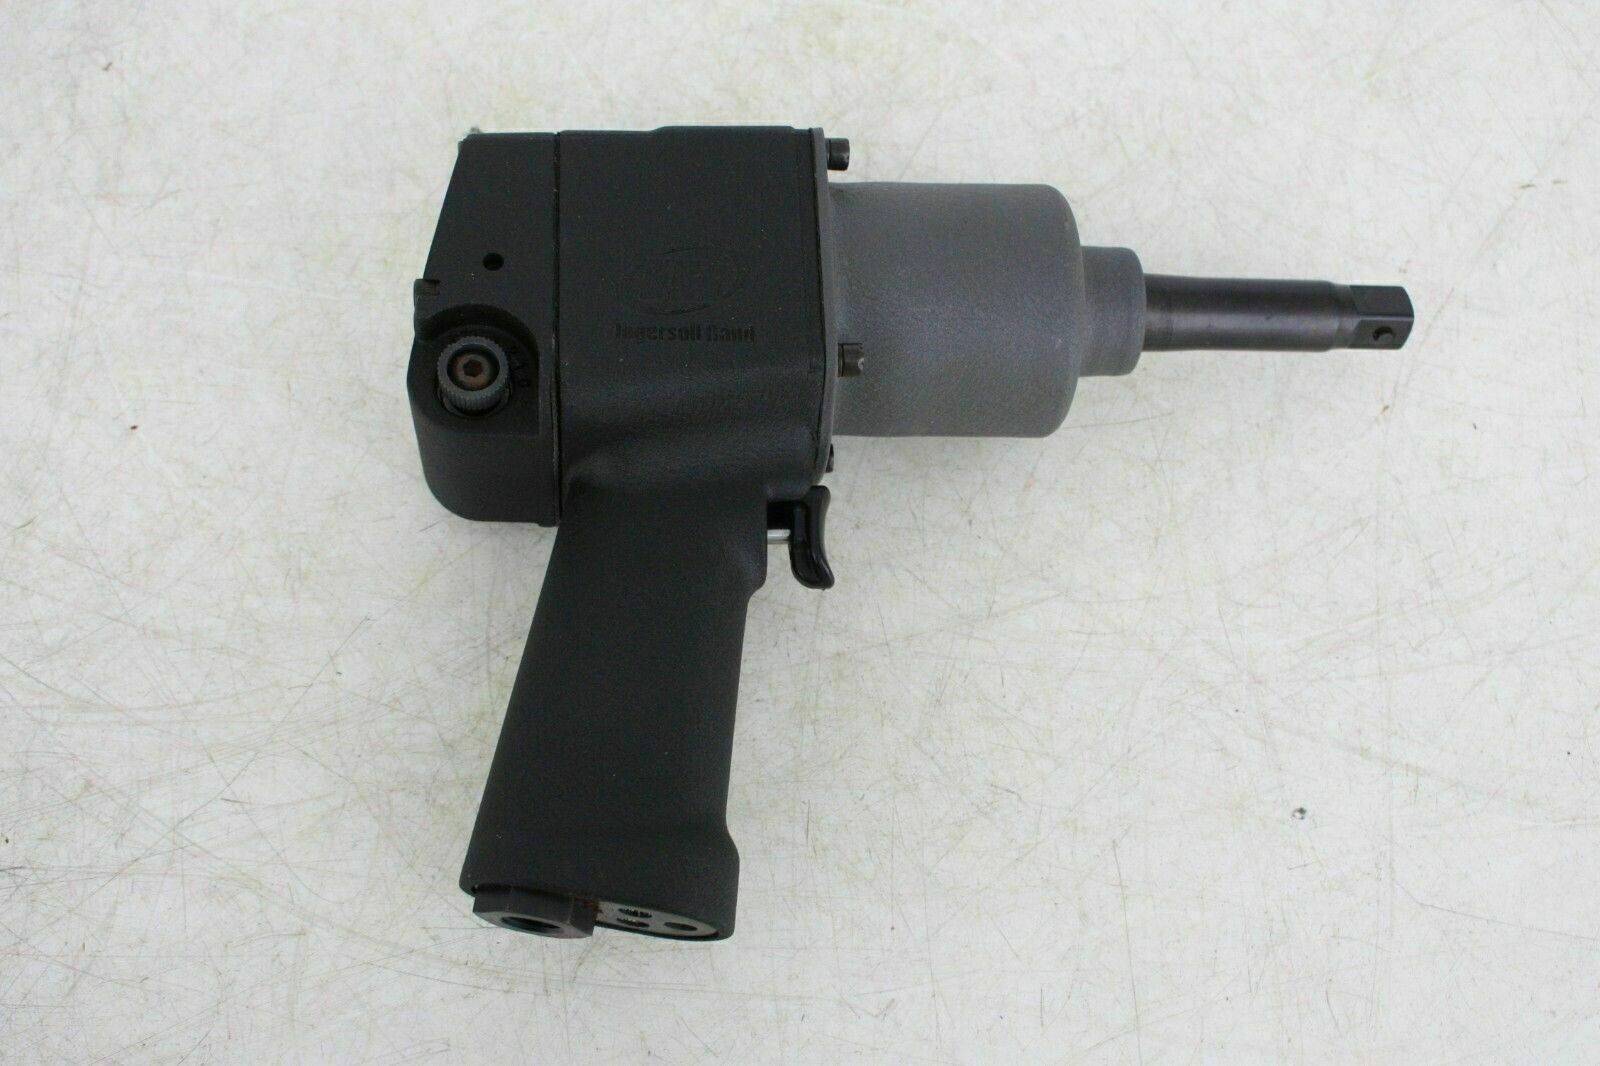 Ingersoll-Rand-air-impact-wrench-2906p-impactool-175431113092-3